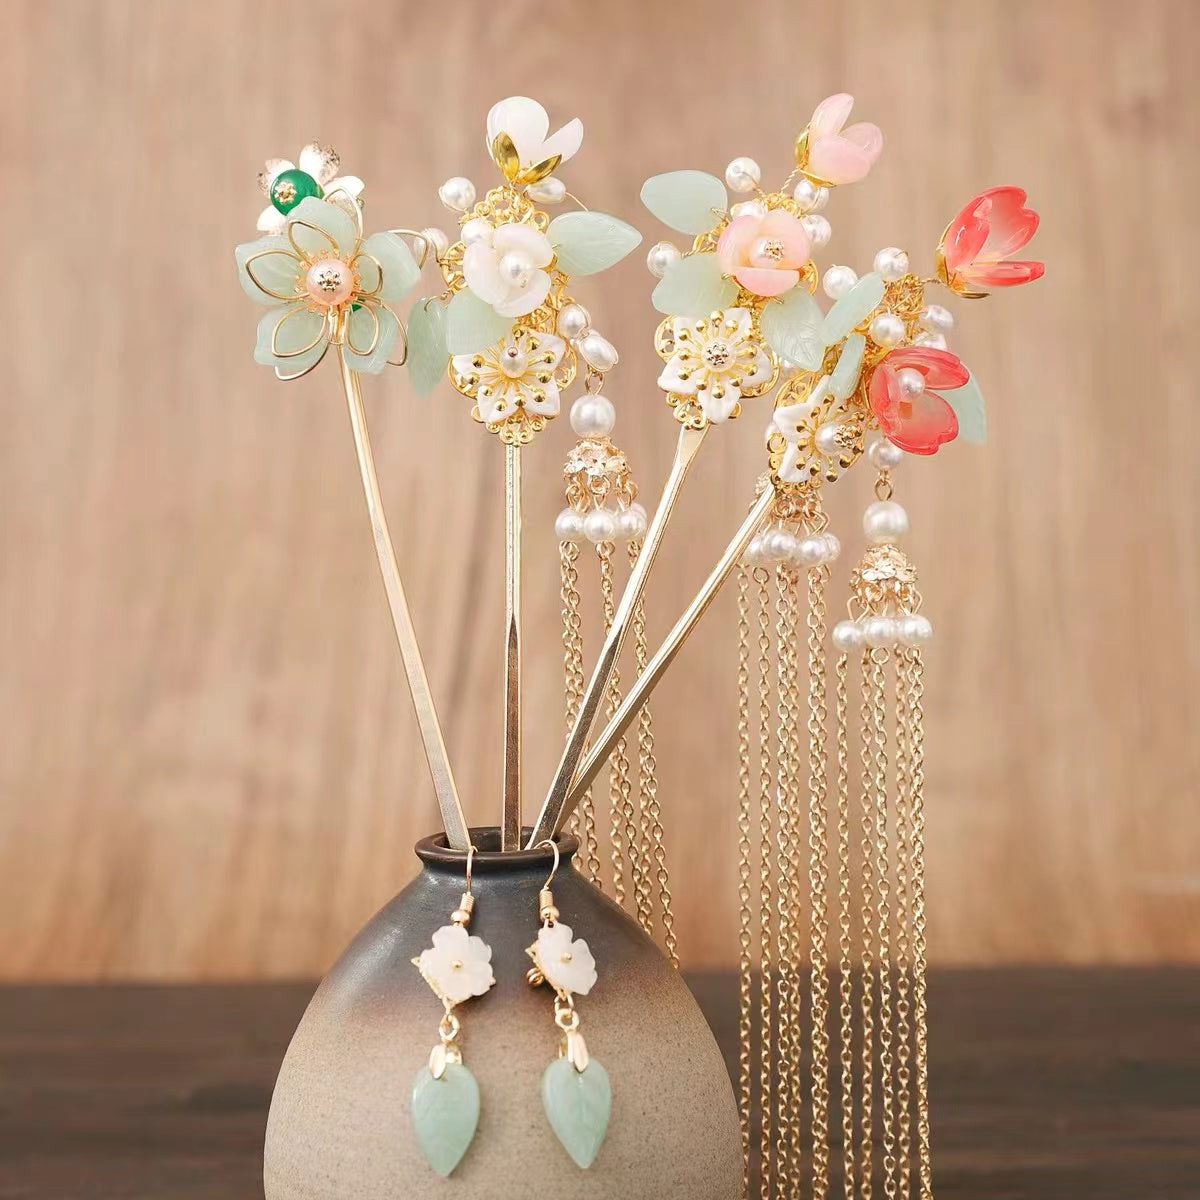 Big discount $9.9 for 3pcs hair clip with tassel - Duo Fashion